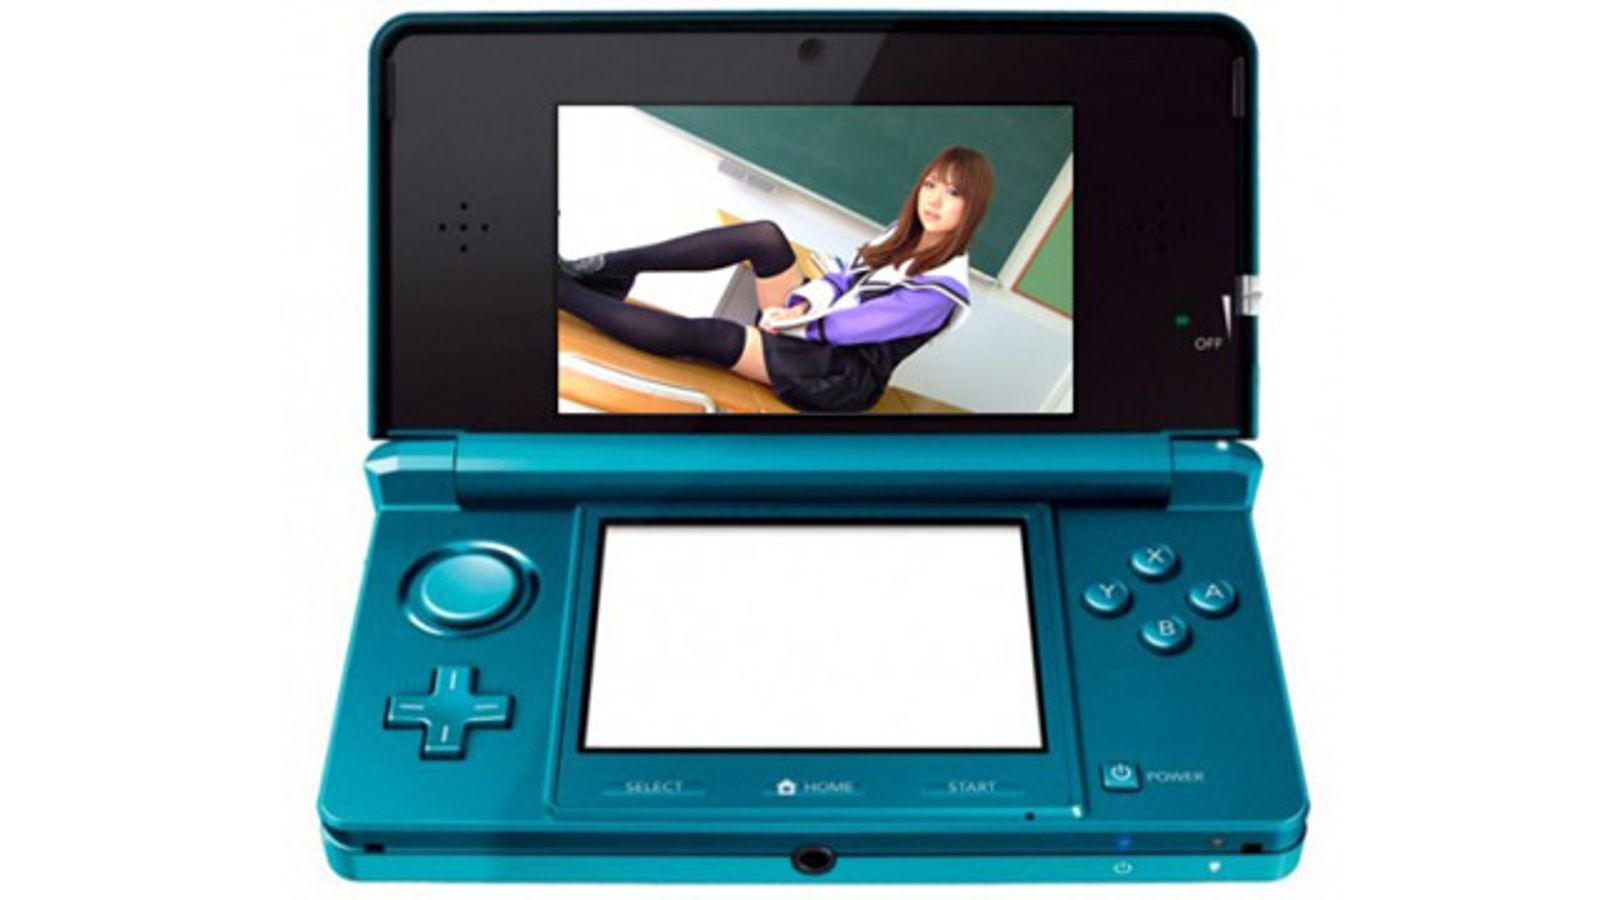 First Adult Images Available for Just-Released Nintendo 3DS